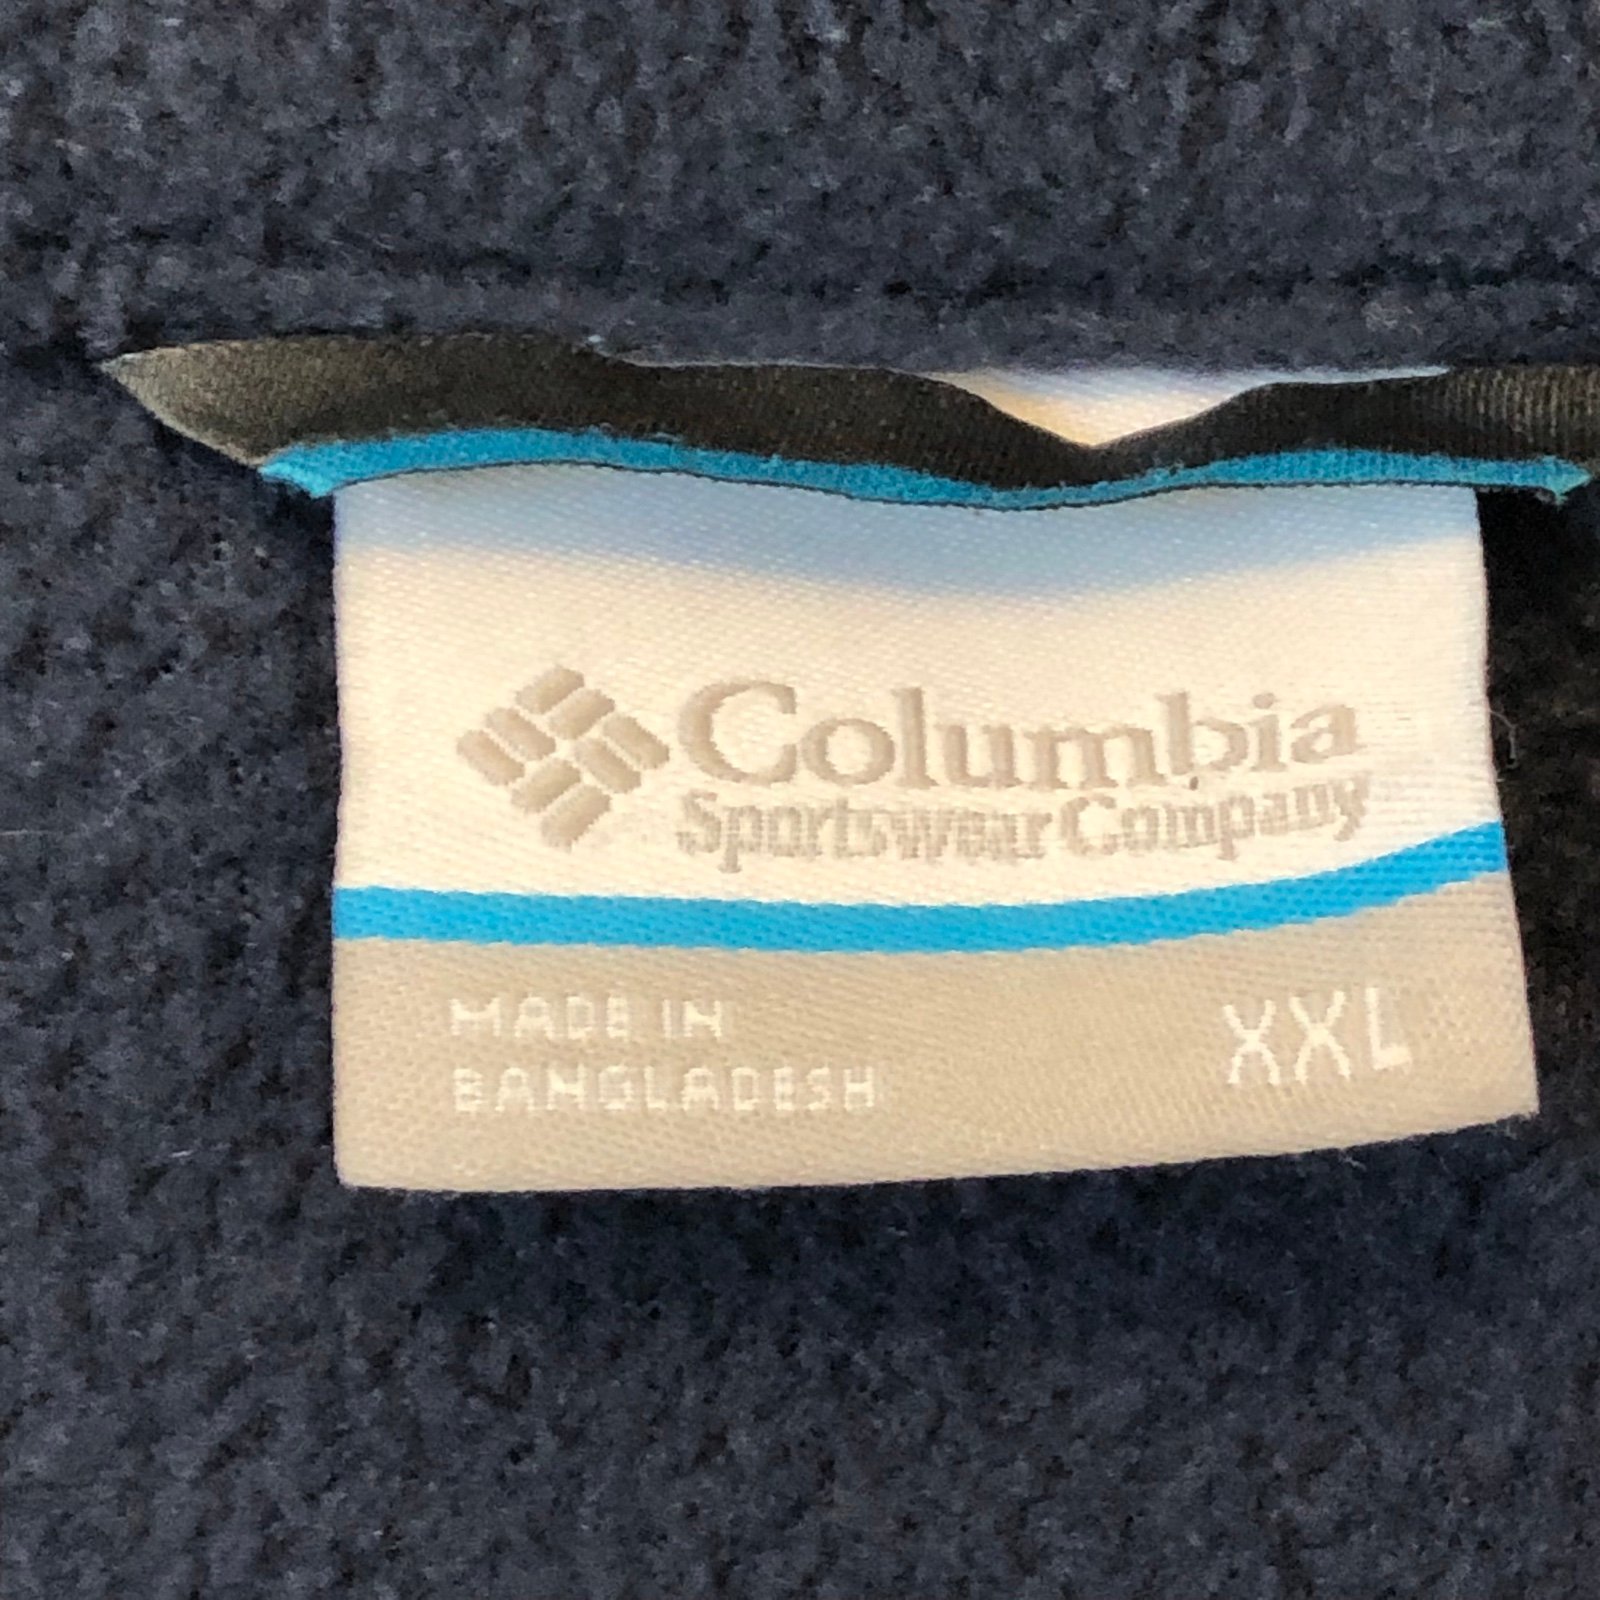 save up to 70% Columbia Women’s XXL Full Zip Blue Fleece Jacket Read kCd24Mnx9 New Style